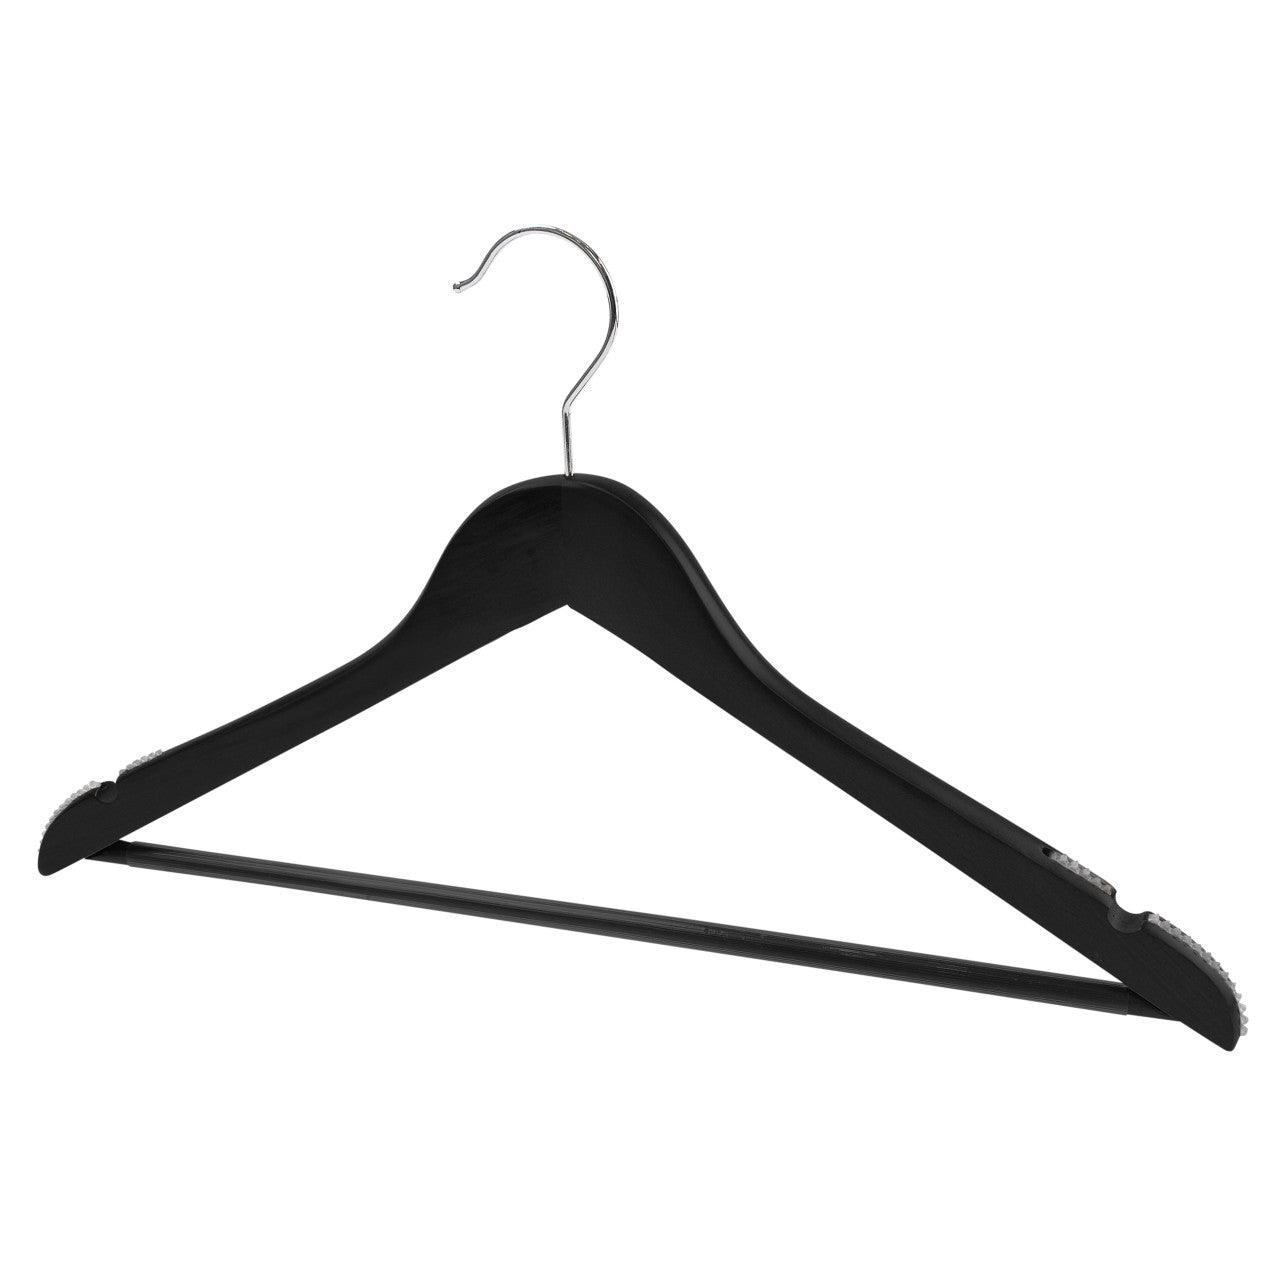 Black Wood Suit Hanger With Curved Body - 43cm X 14mm Thick (Sold in 25/50/100) - Hangersforless